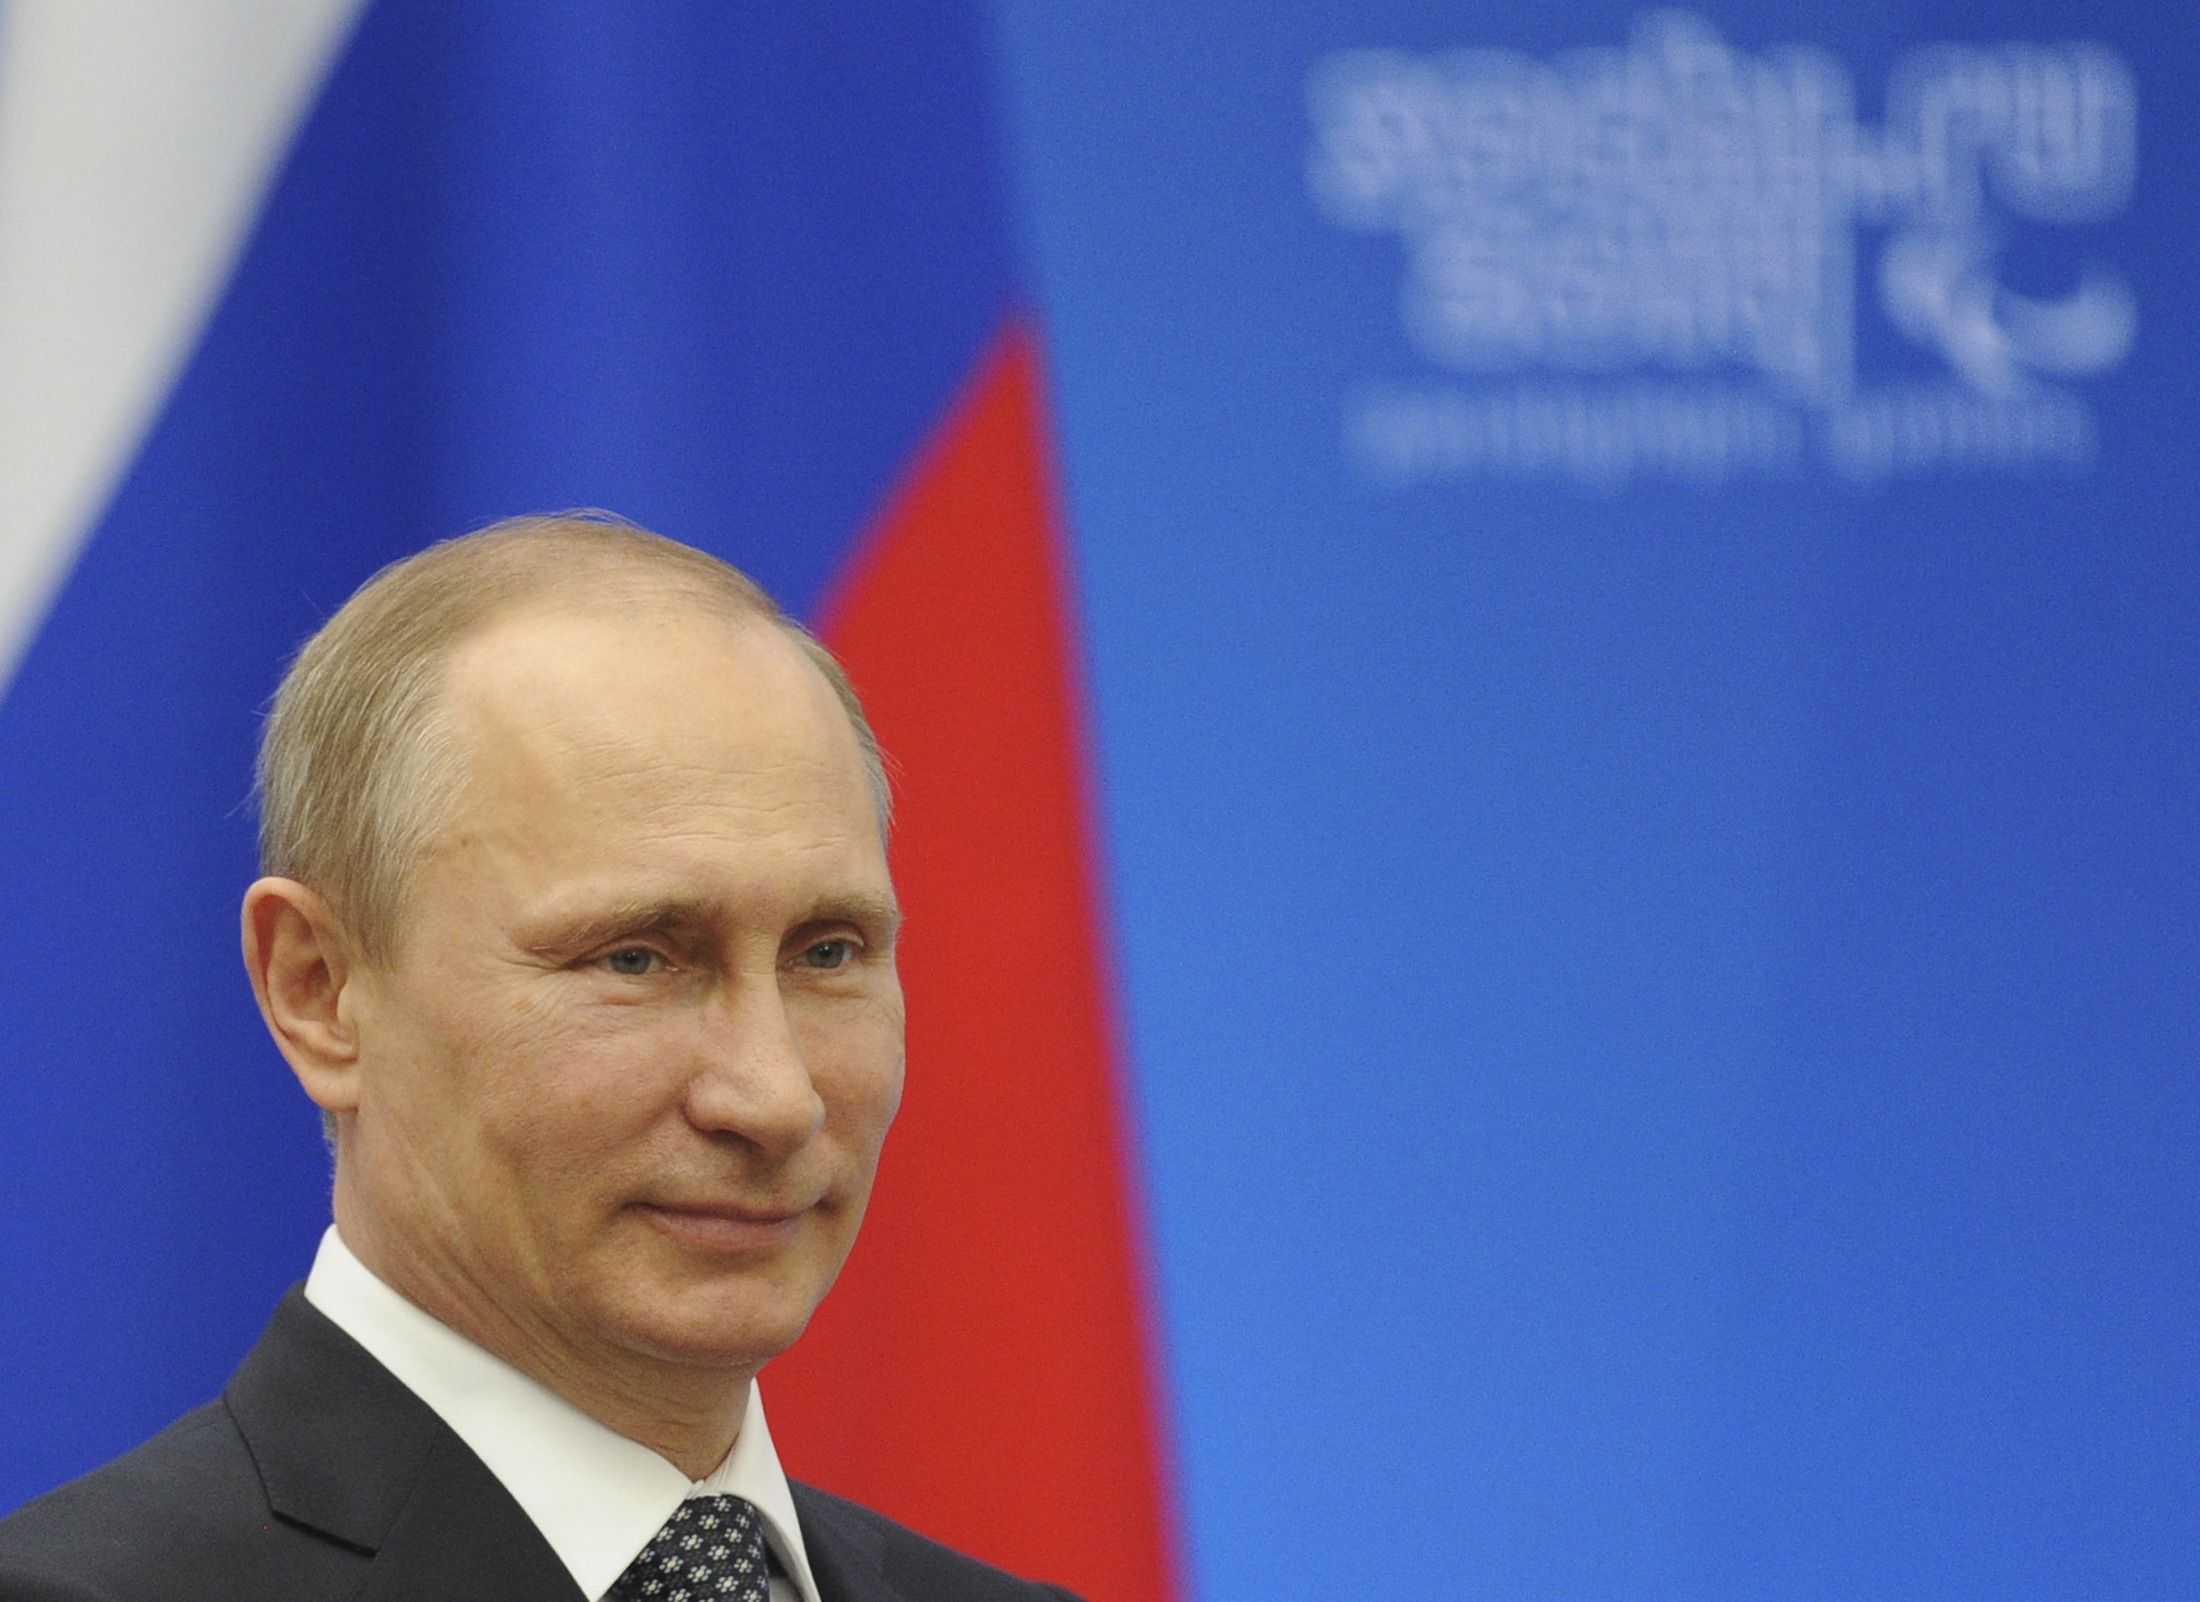 Putin recognises Crimea as independent state